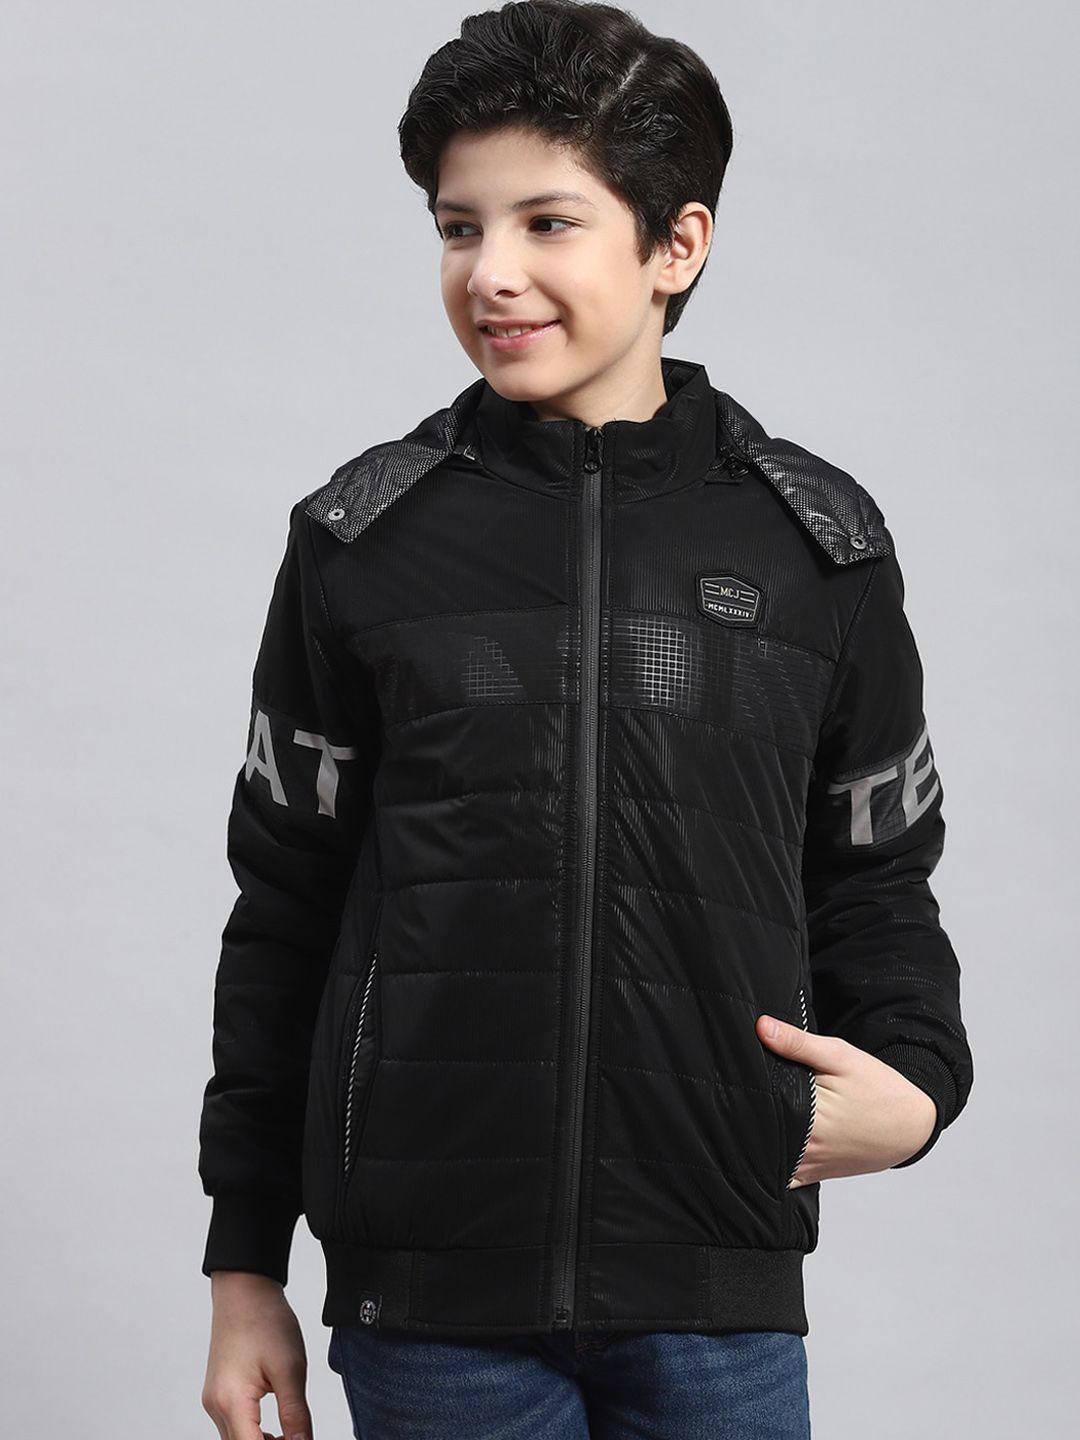 monte carlo boys typography printed hooded lightweight padded jacket